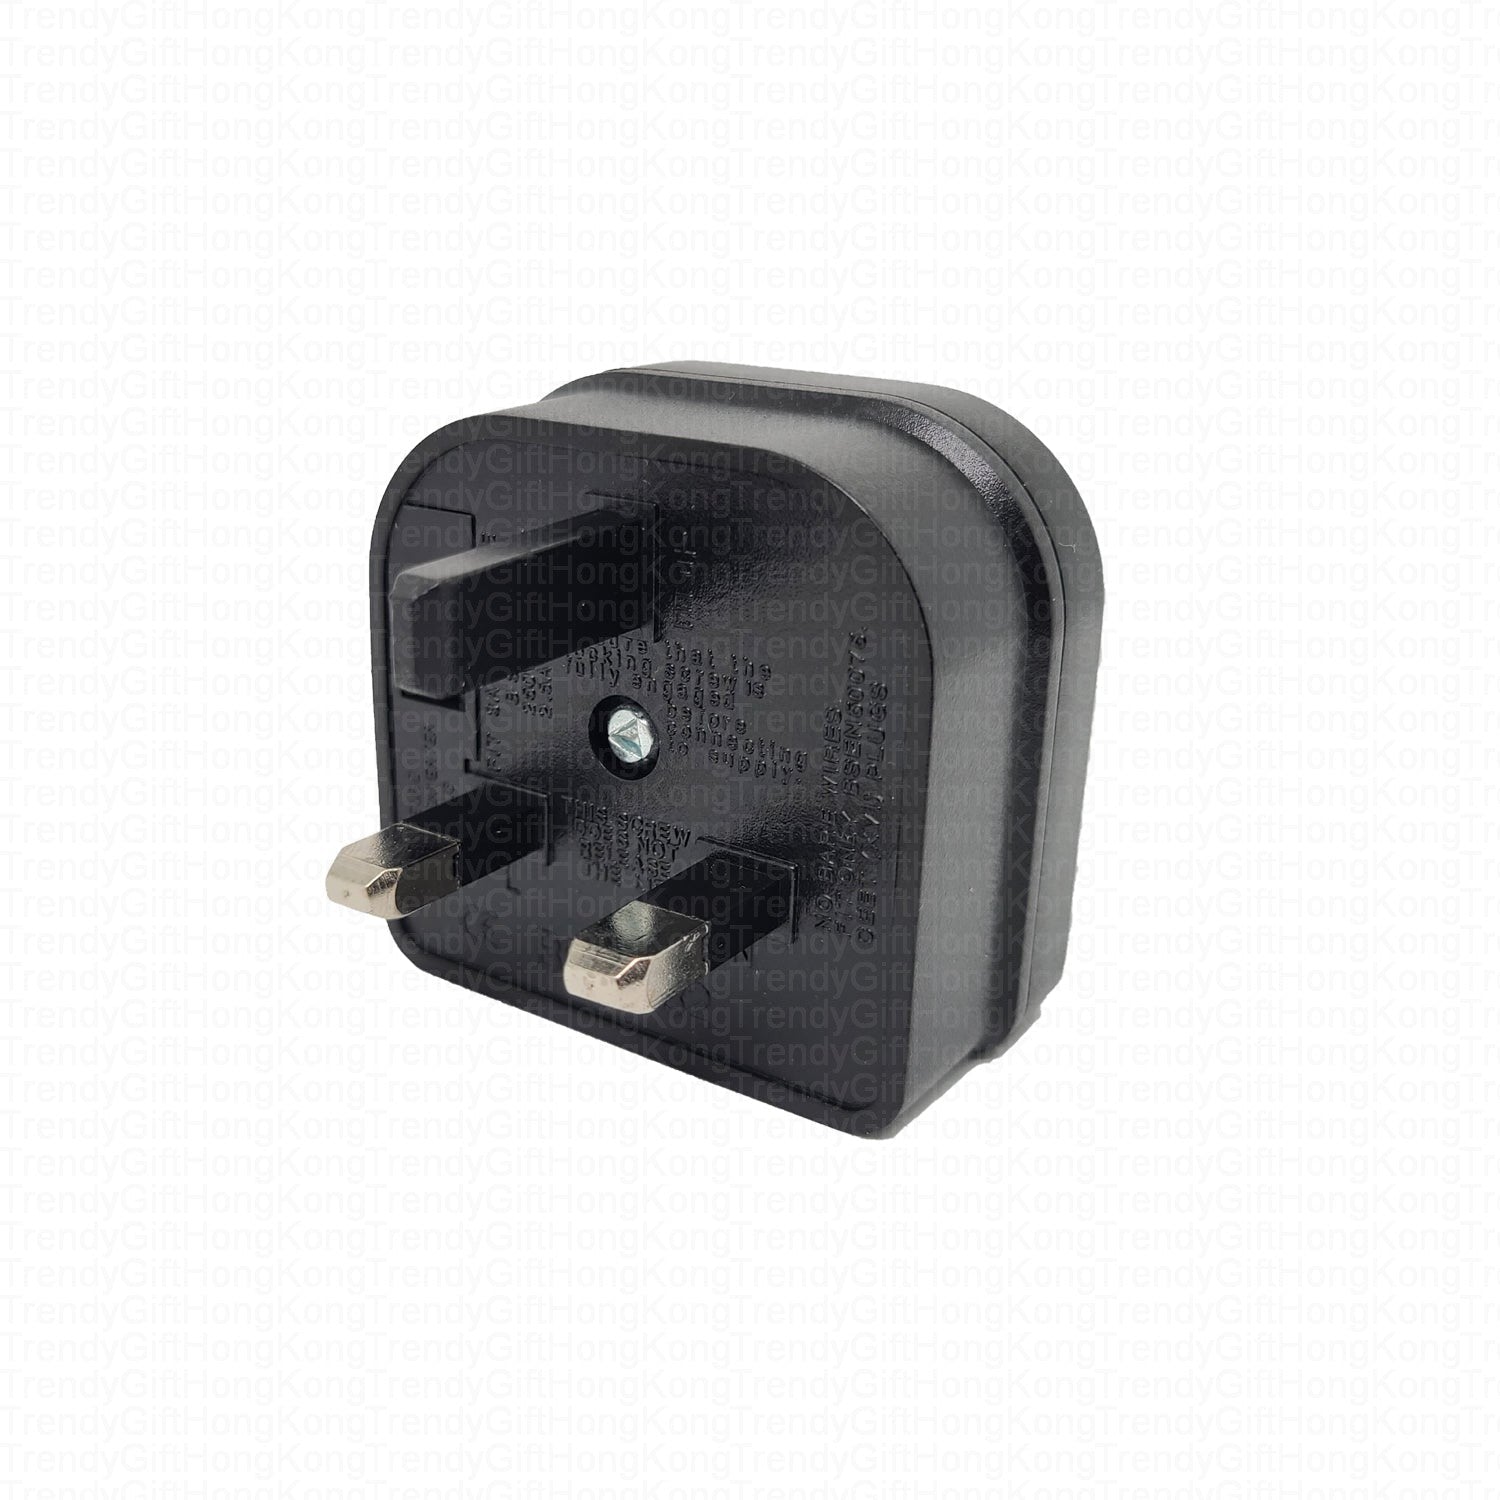 Fused Converter Plug: 2-Pin Type A to 3-Pin British | Model: BS-5732 trendygifthk